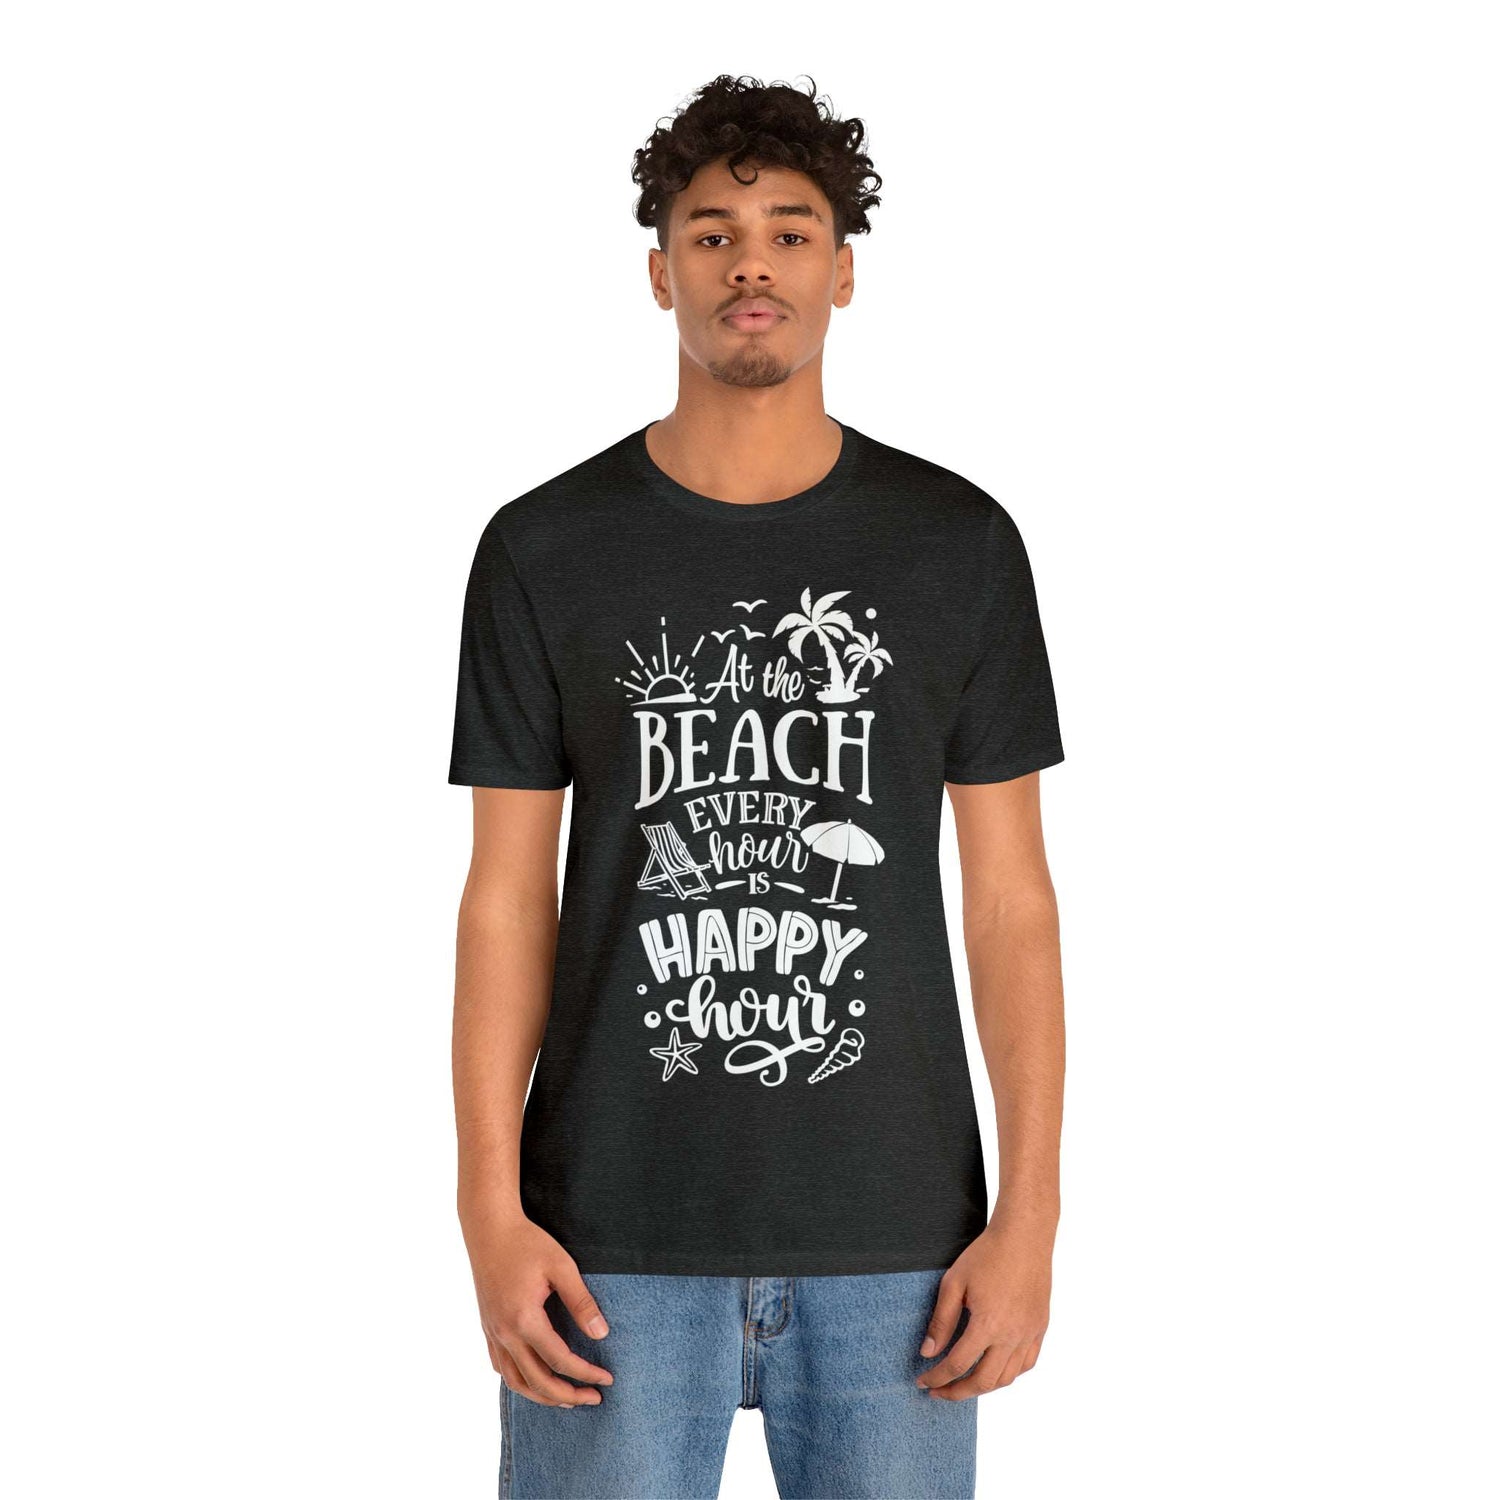 At The Beach Everyday Jersey Short Sleeve Tee